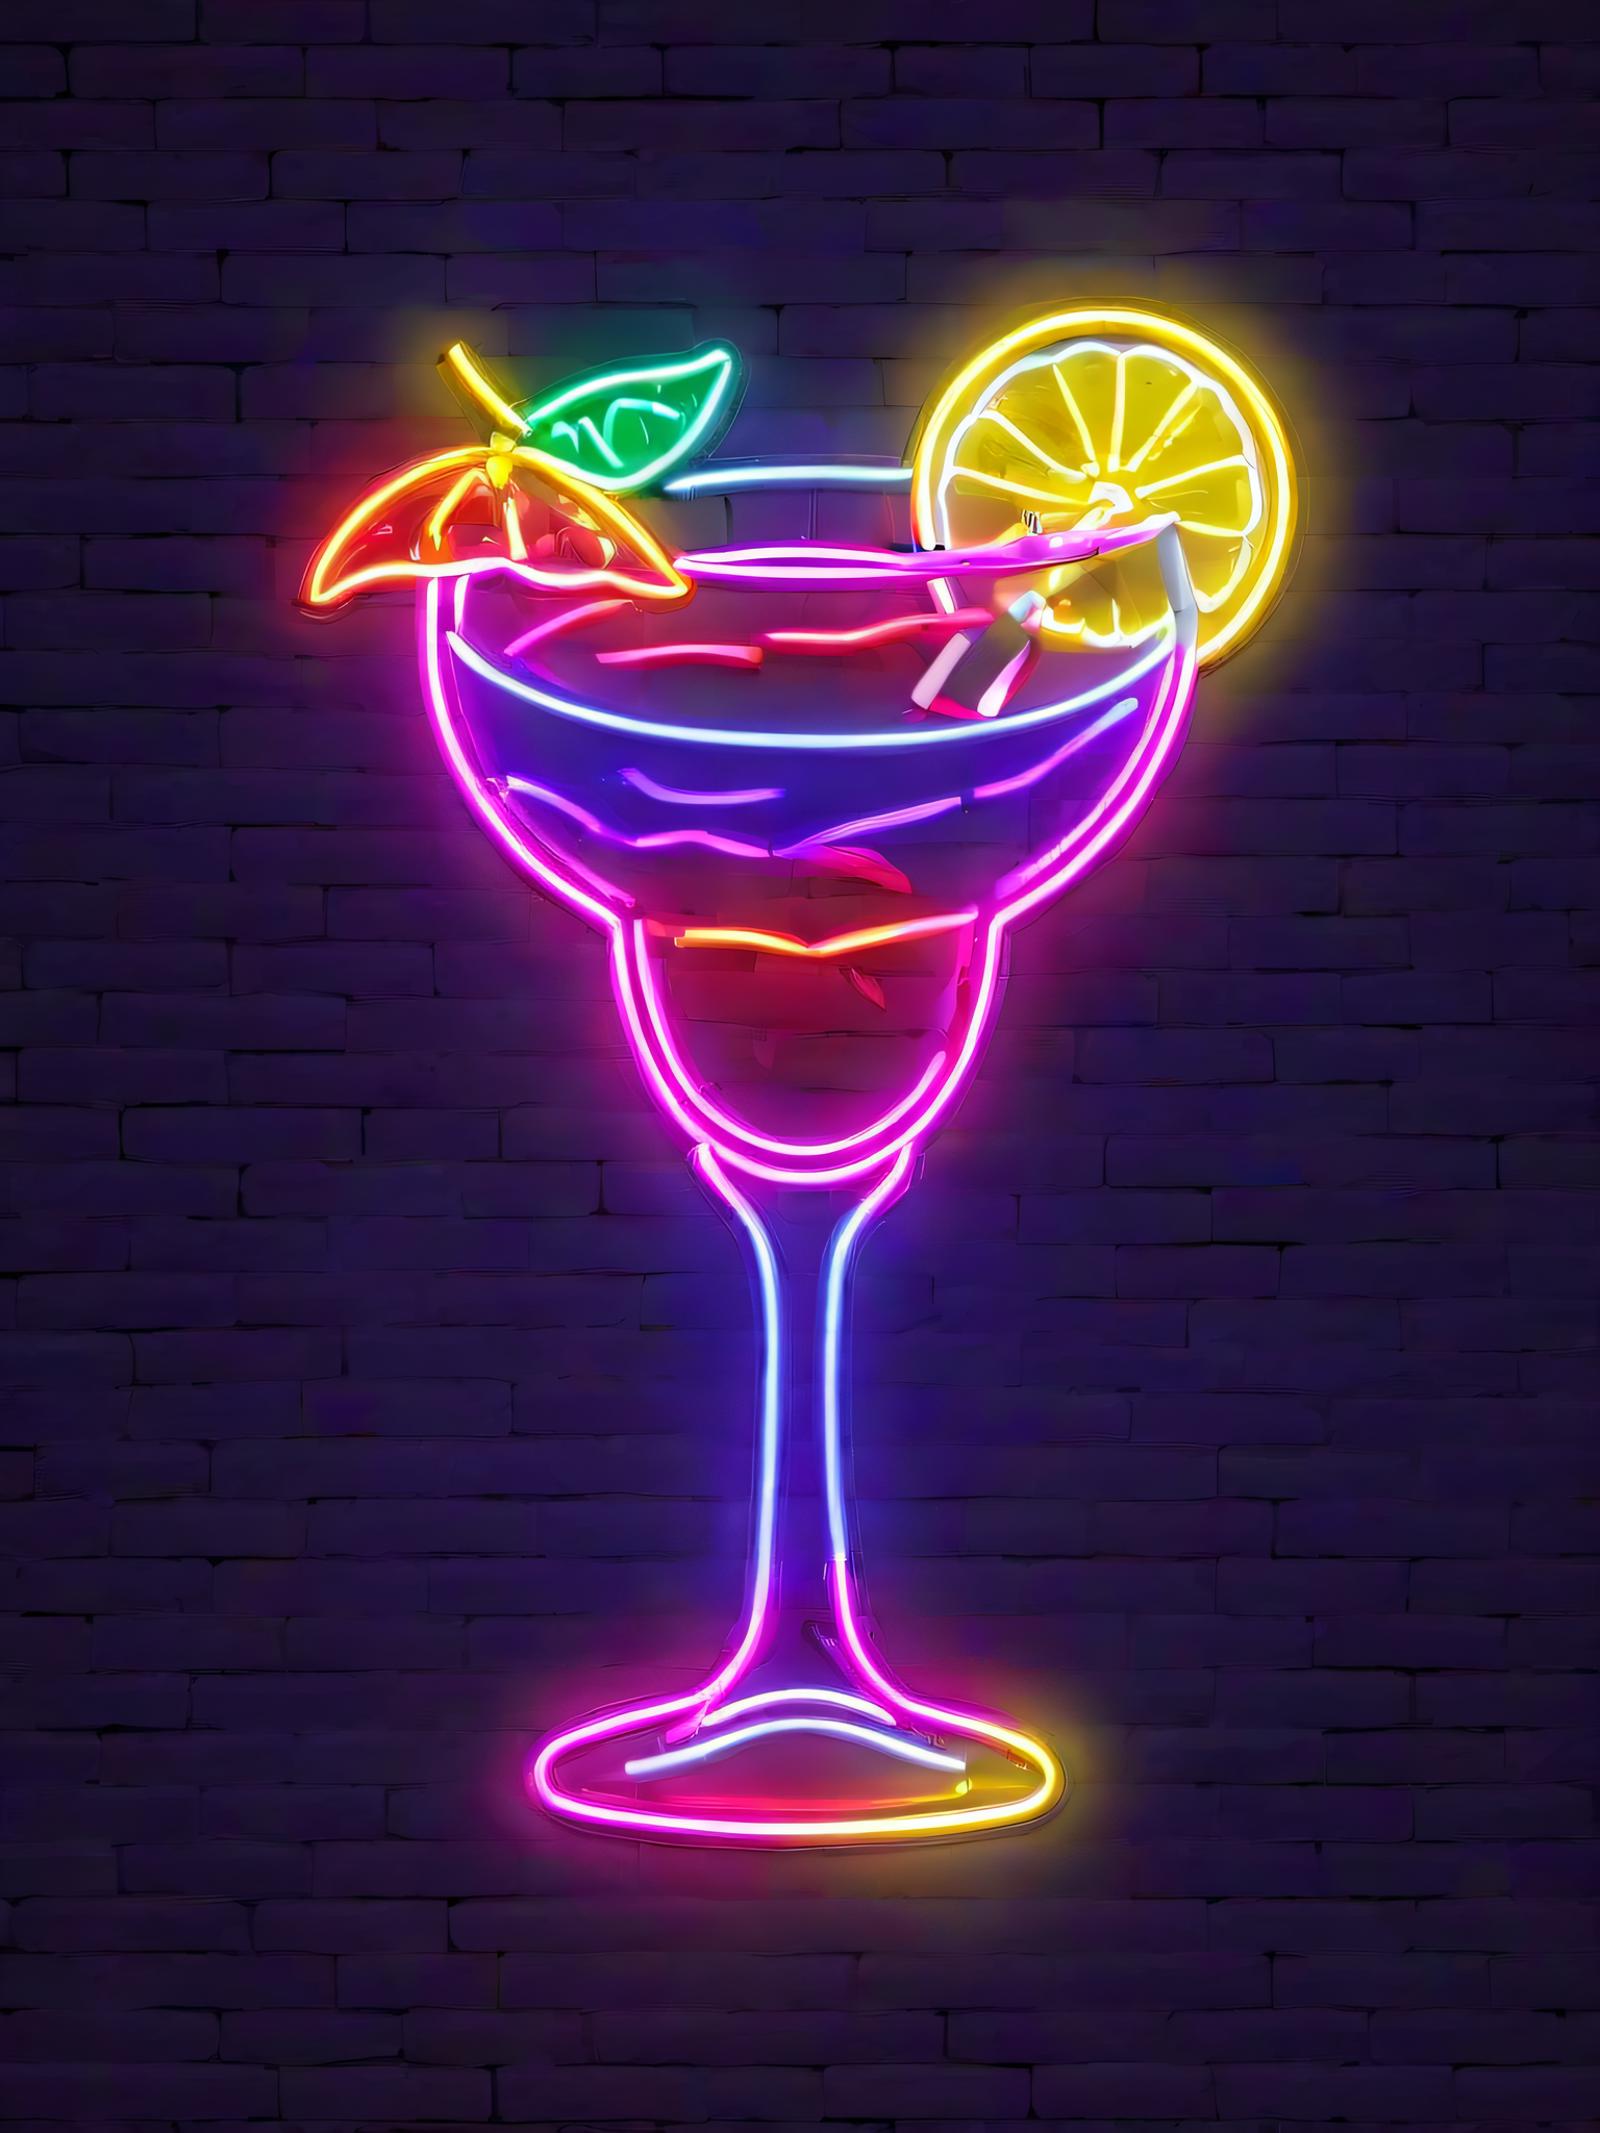 PE Neon Sign [Style] image by eliflmiami